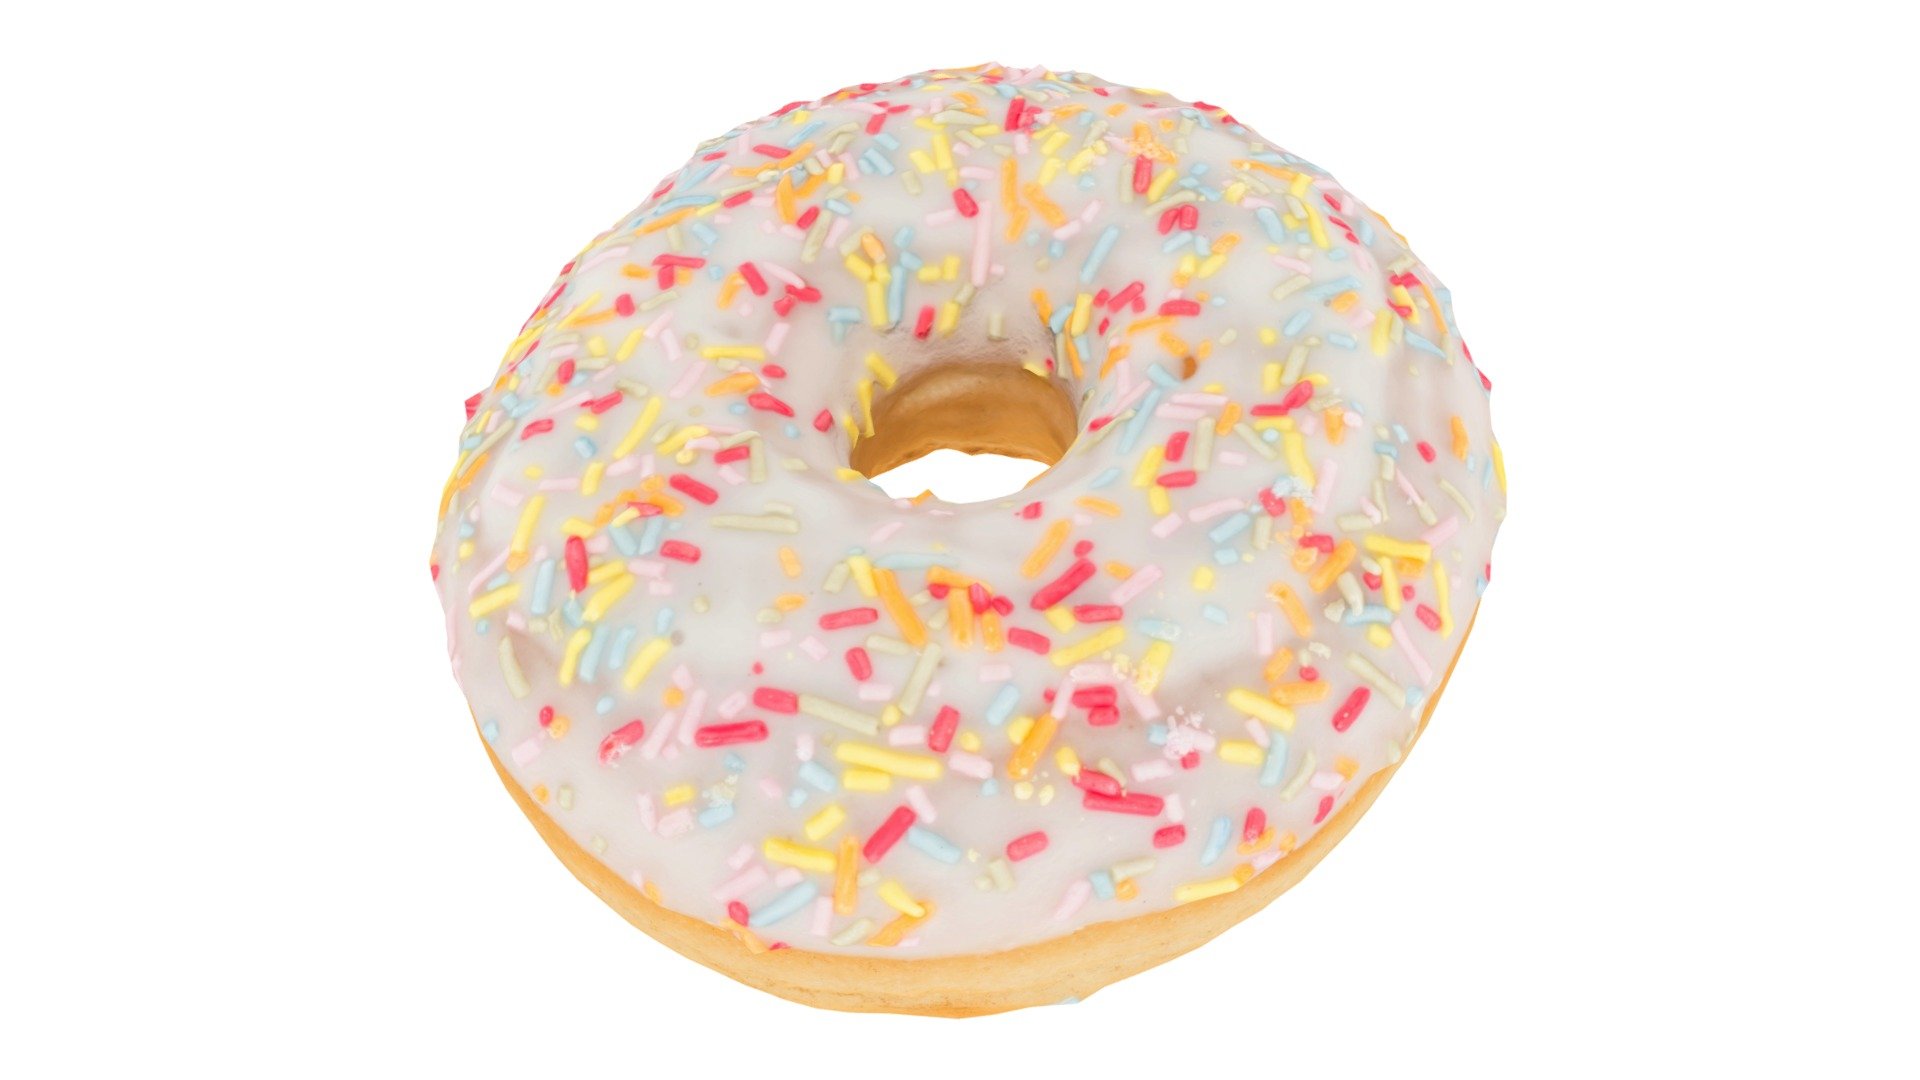 Highly detailed, photorealistic, 3d scanned model of a sprinkled donut. 8k textures maps, optimized topology and uv unwrapped.

Model shown here is lowpoly with diffuse map only and 4k texture size.

This model is available at www.thecreativecrops.com 3d model